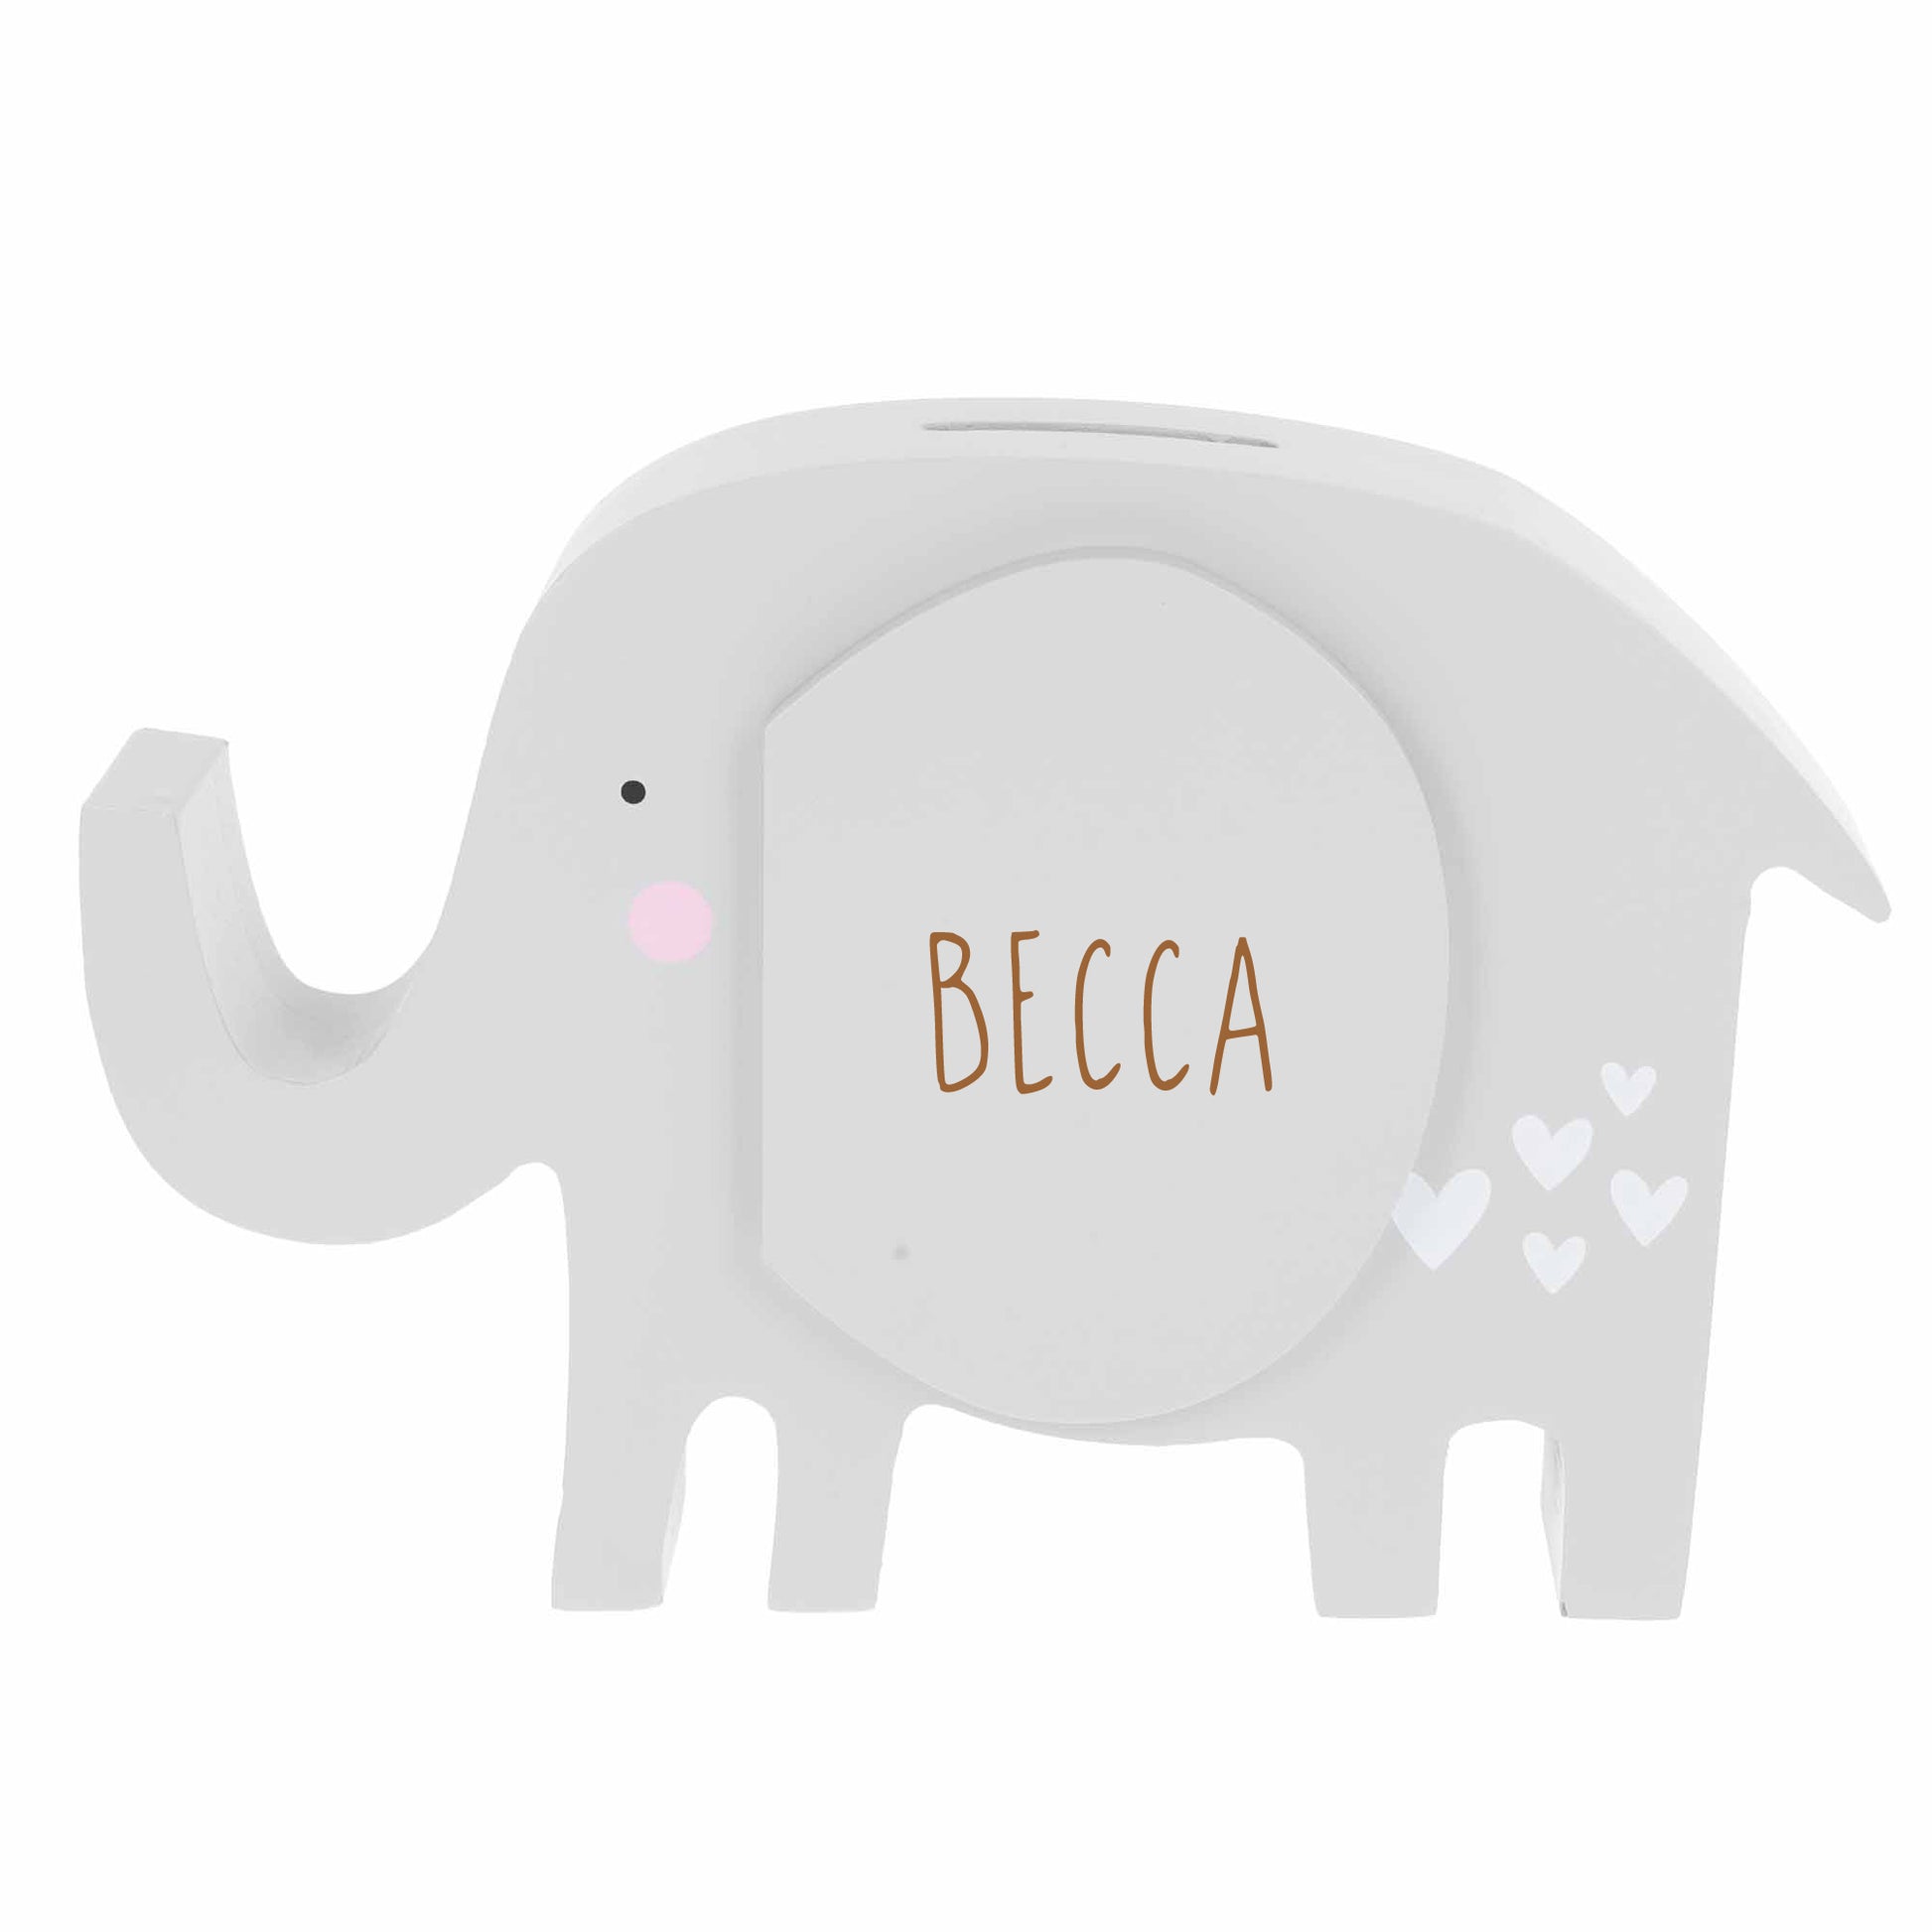 Personalised Engraved Kids Elephant Money Box with Name  - Always Looking Good -   